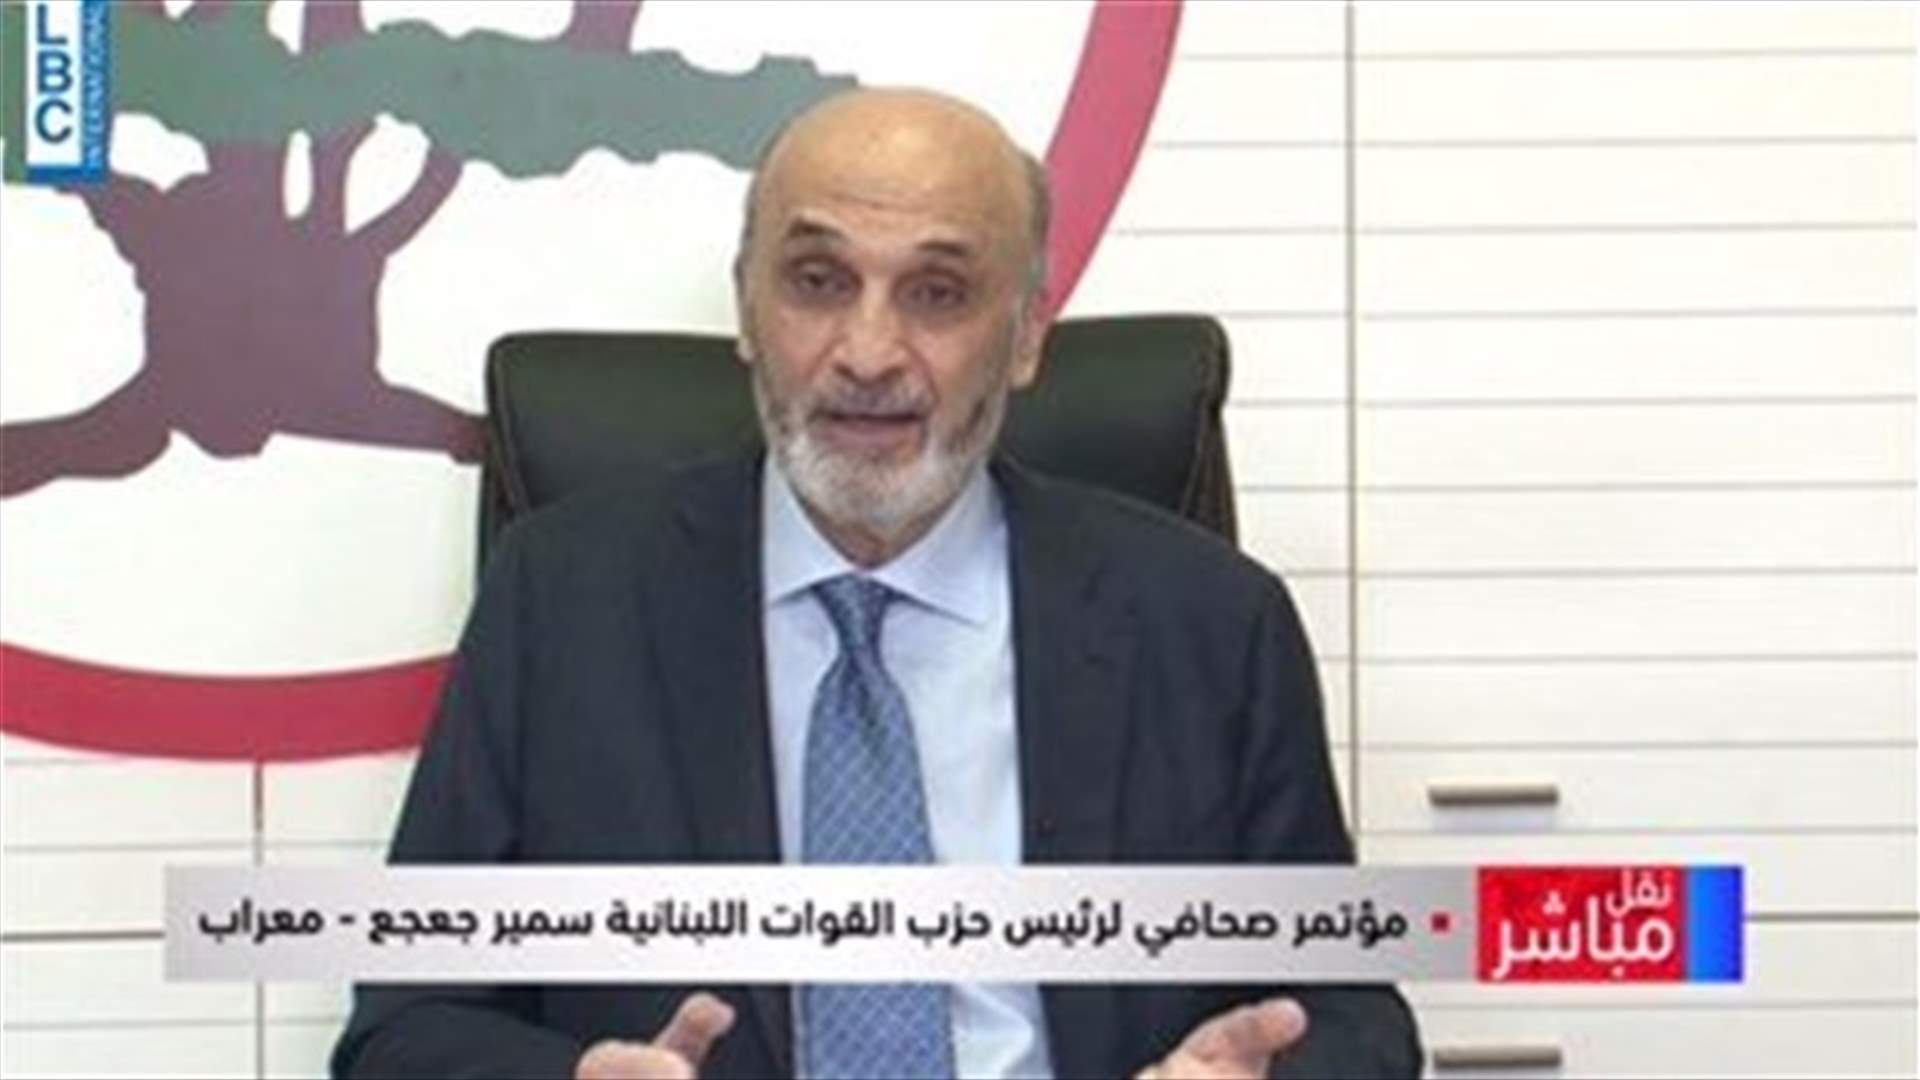 Geagea: Lawsuits will be filed against journalist spreading rumors about my health